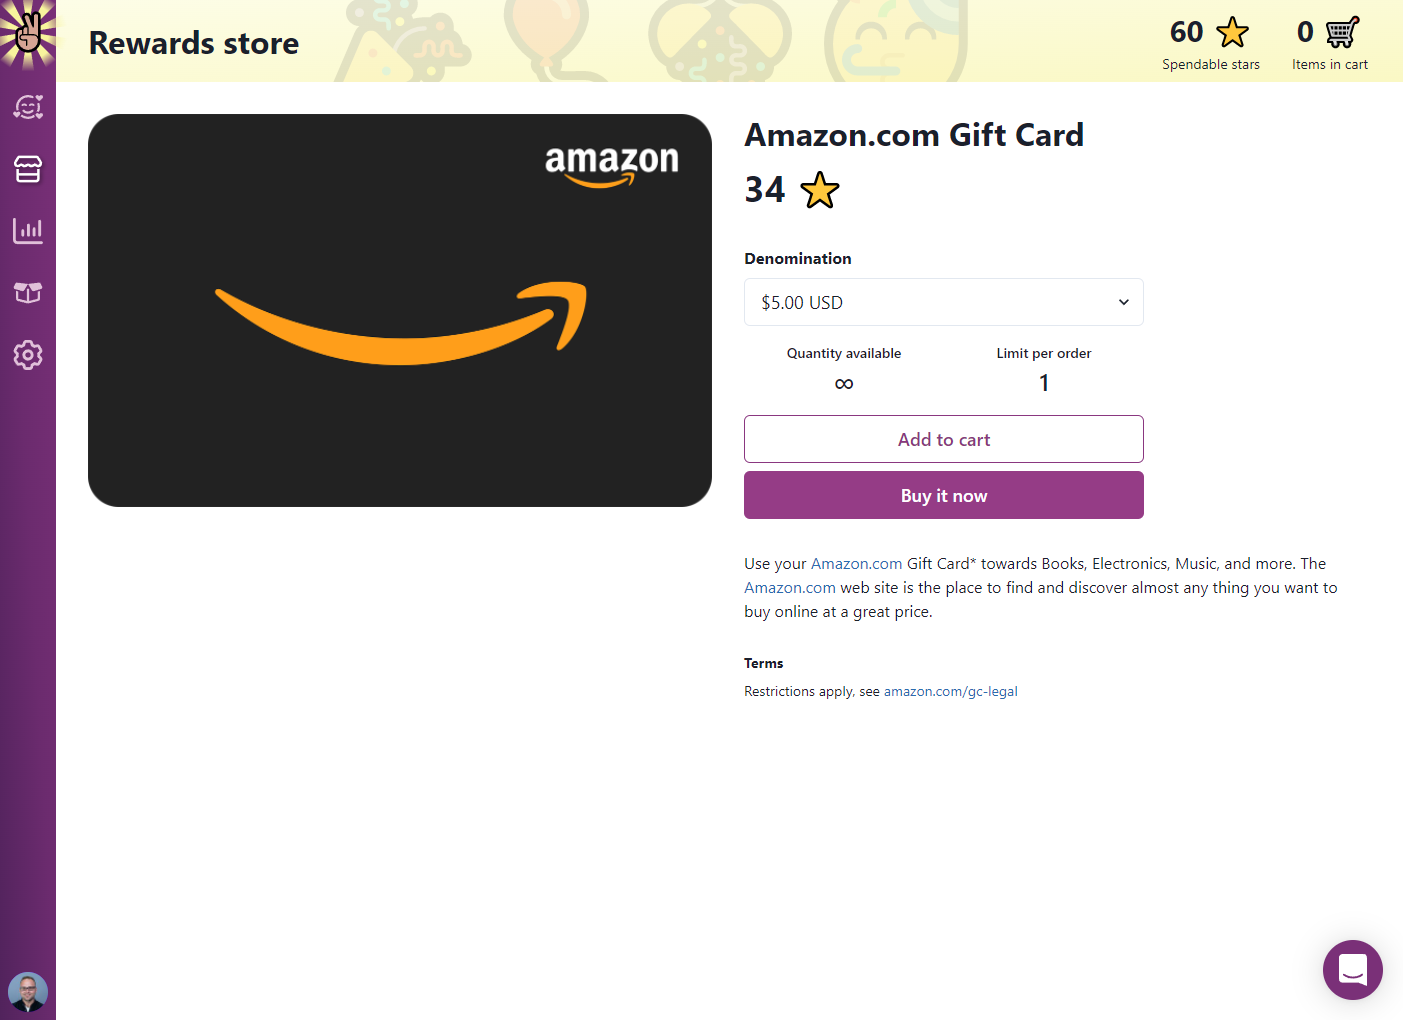 Amazon gift card in rewards store